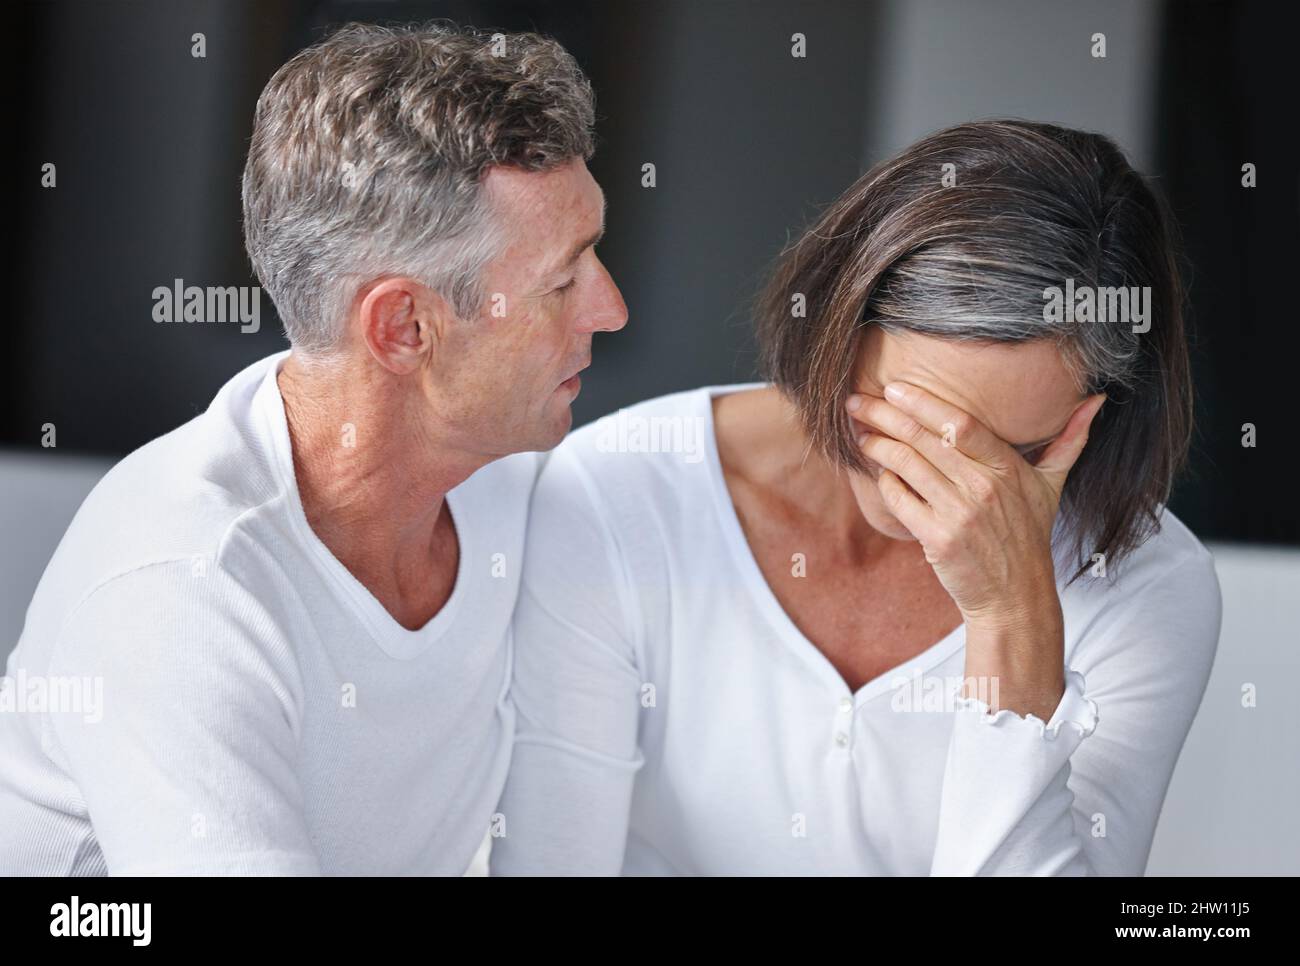 Shes feeling upset. Shot of a mature man sitting beside his wife whos feeling depressed. Stock Photo